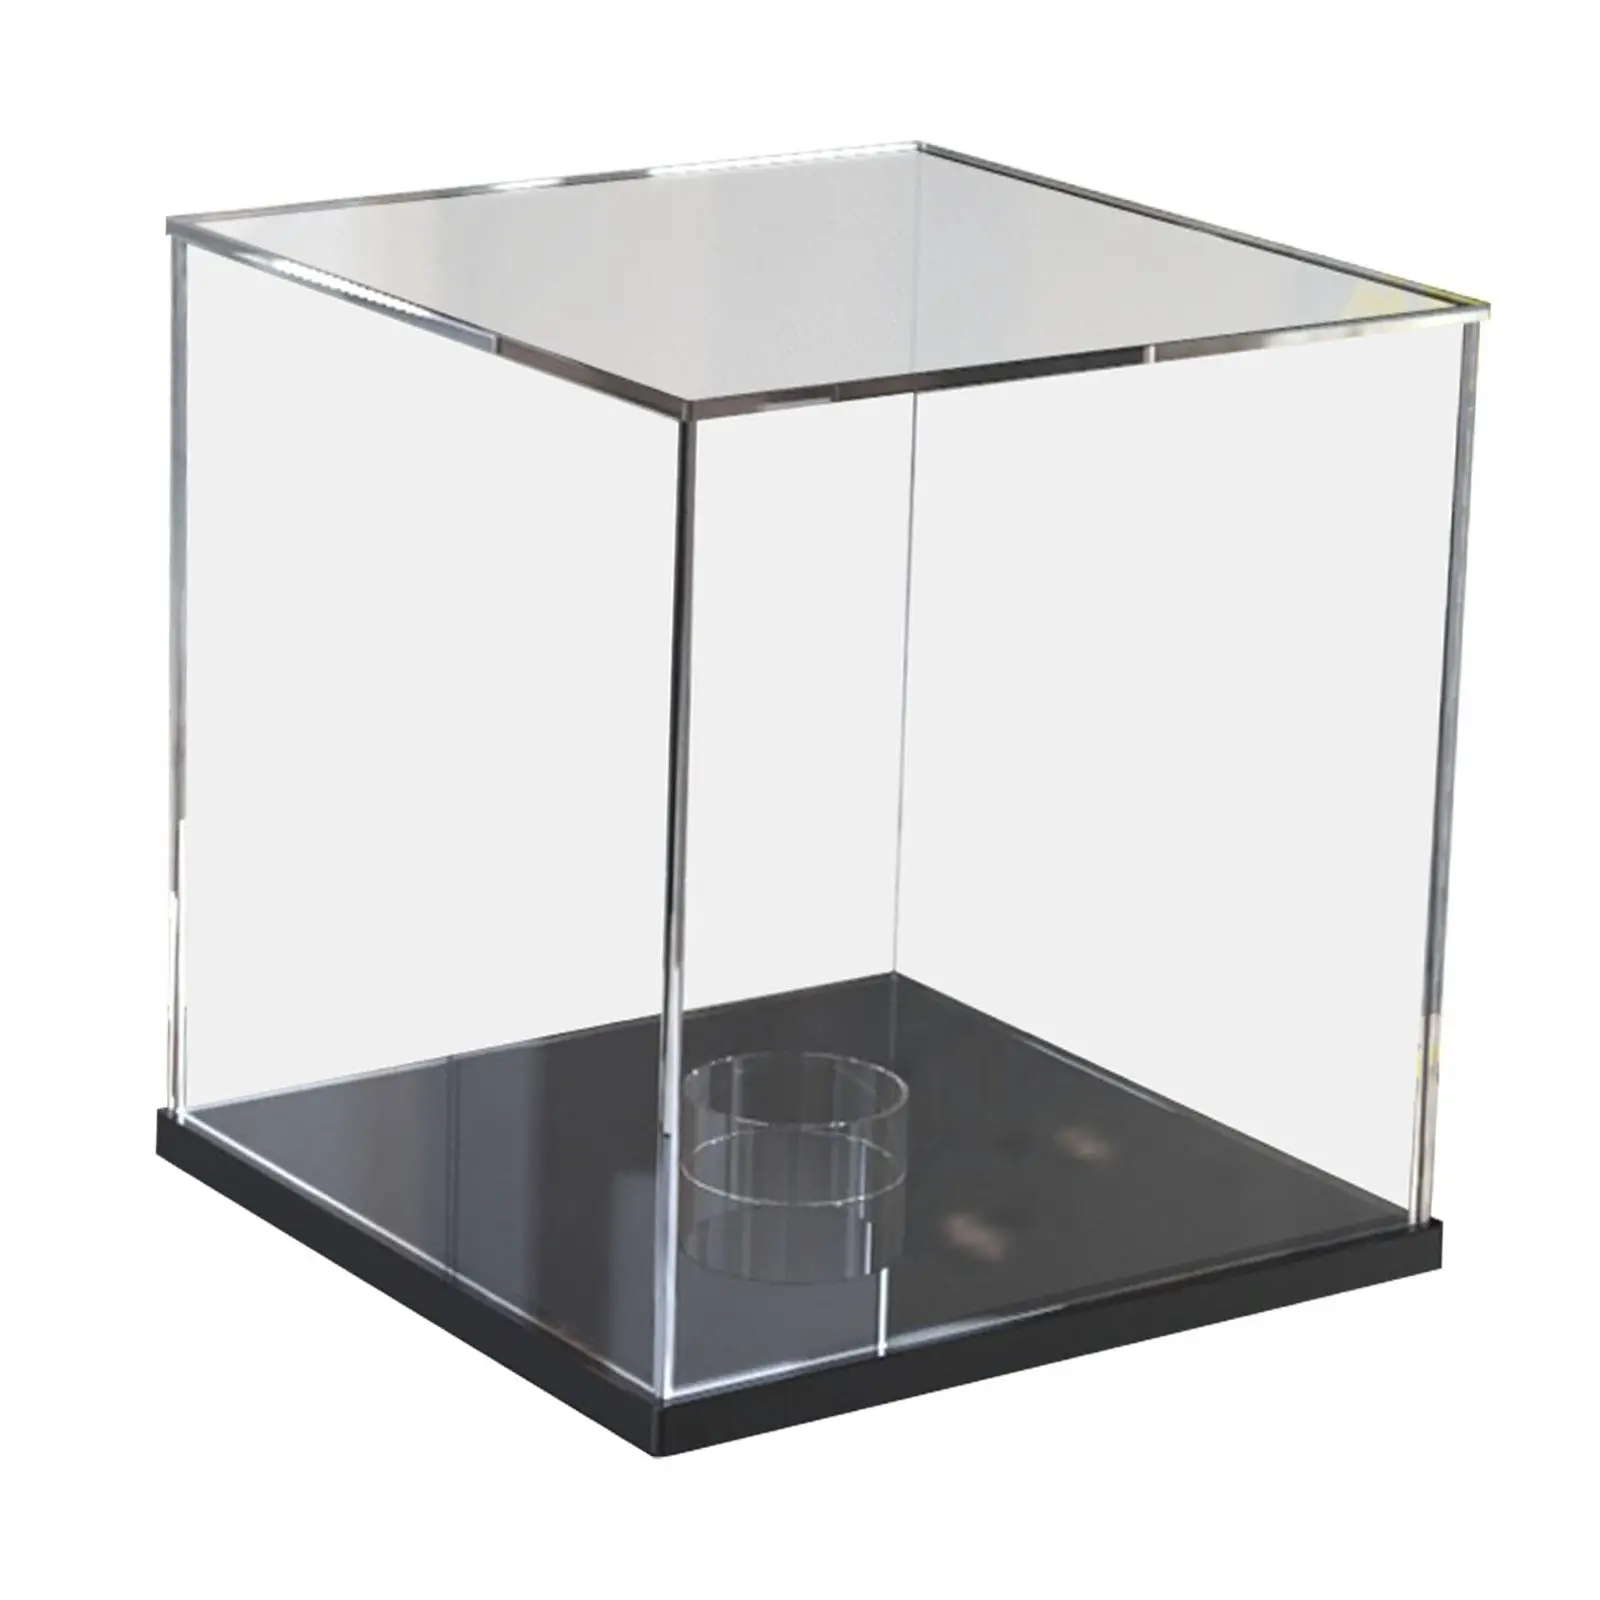 Basketball Display Case with Stand Clear Acrylic Full Size Basketball Display Box for Toys Volleyball Statues Collectibles